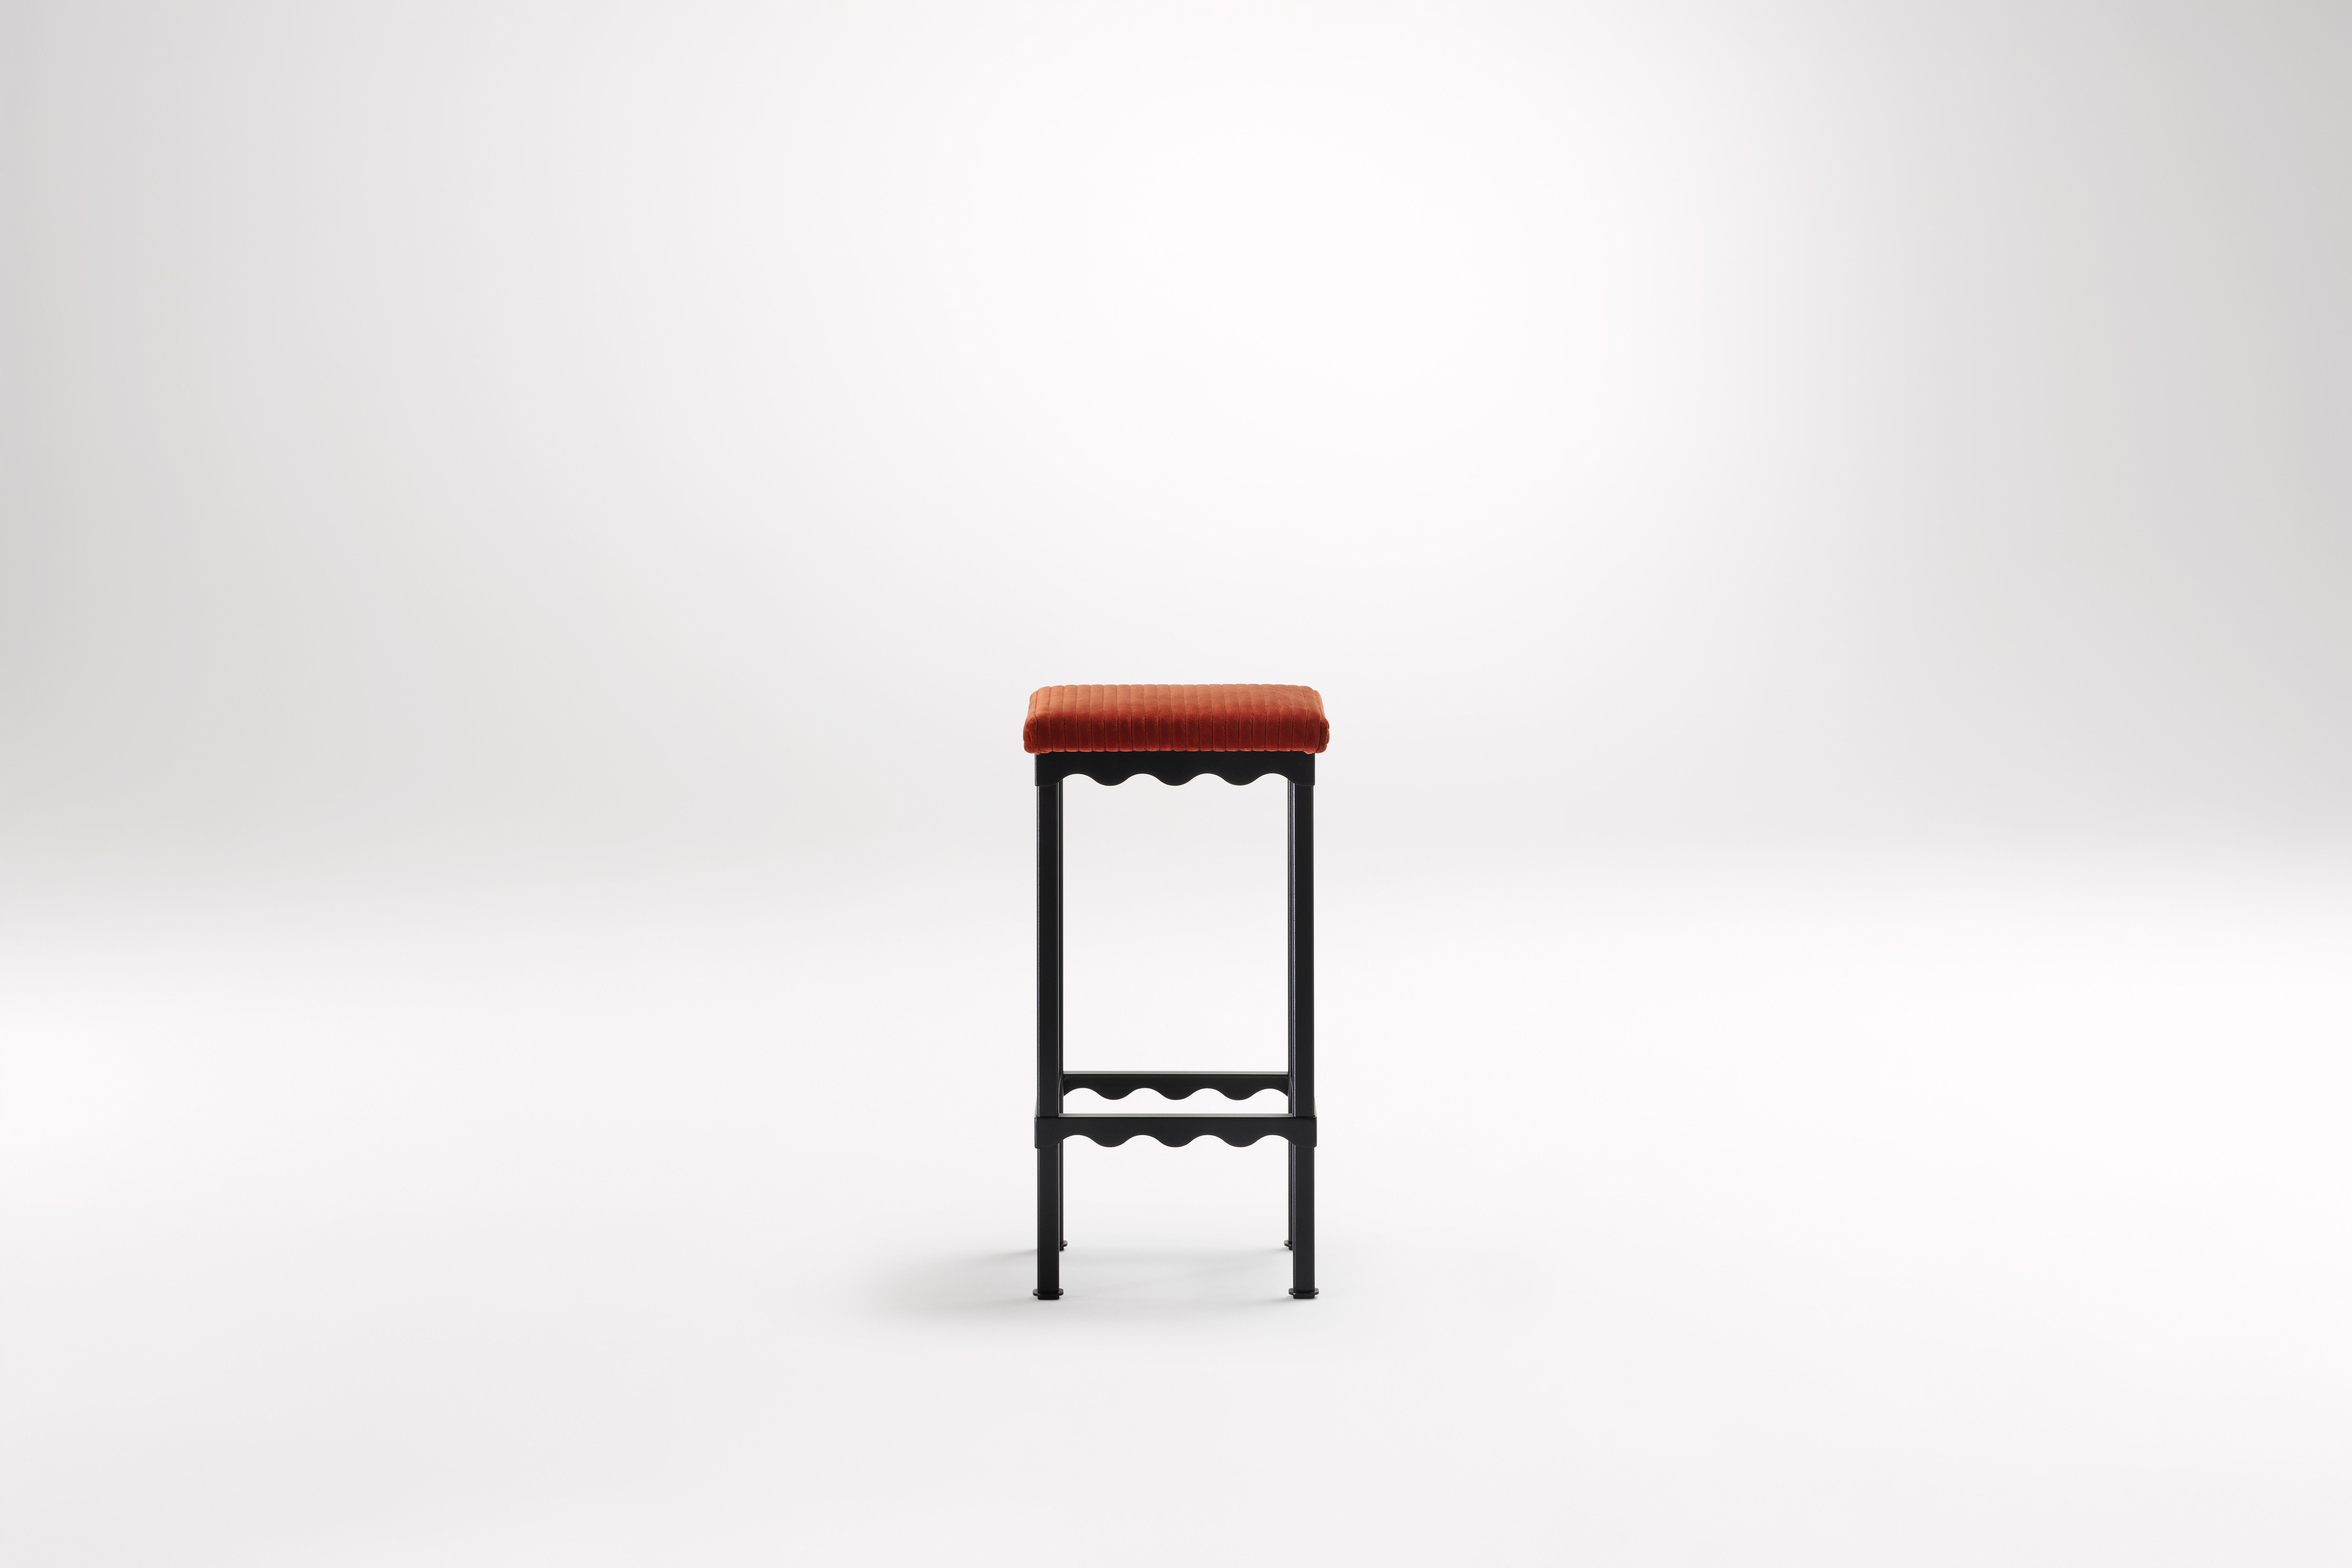 Sanguine Bellini High Stool by Coco Flip
Dimensions: D 34 x W 34 x H 65/75 cm
Materials: Timber / Stone tops, Powder-coated steel frame. 
Weight: 8kg
Frame Finishes: Textura Black.

Coco Flip is a Melbourne based furniture and lighting design